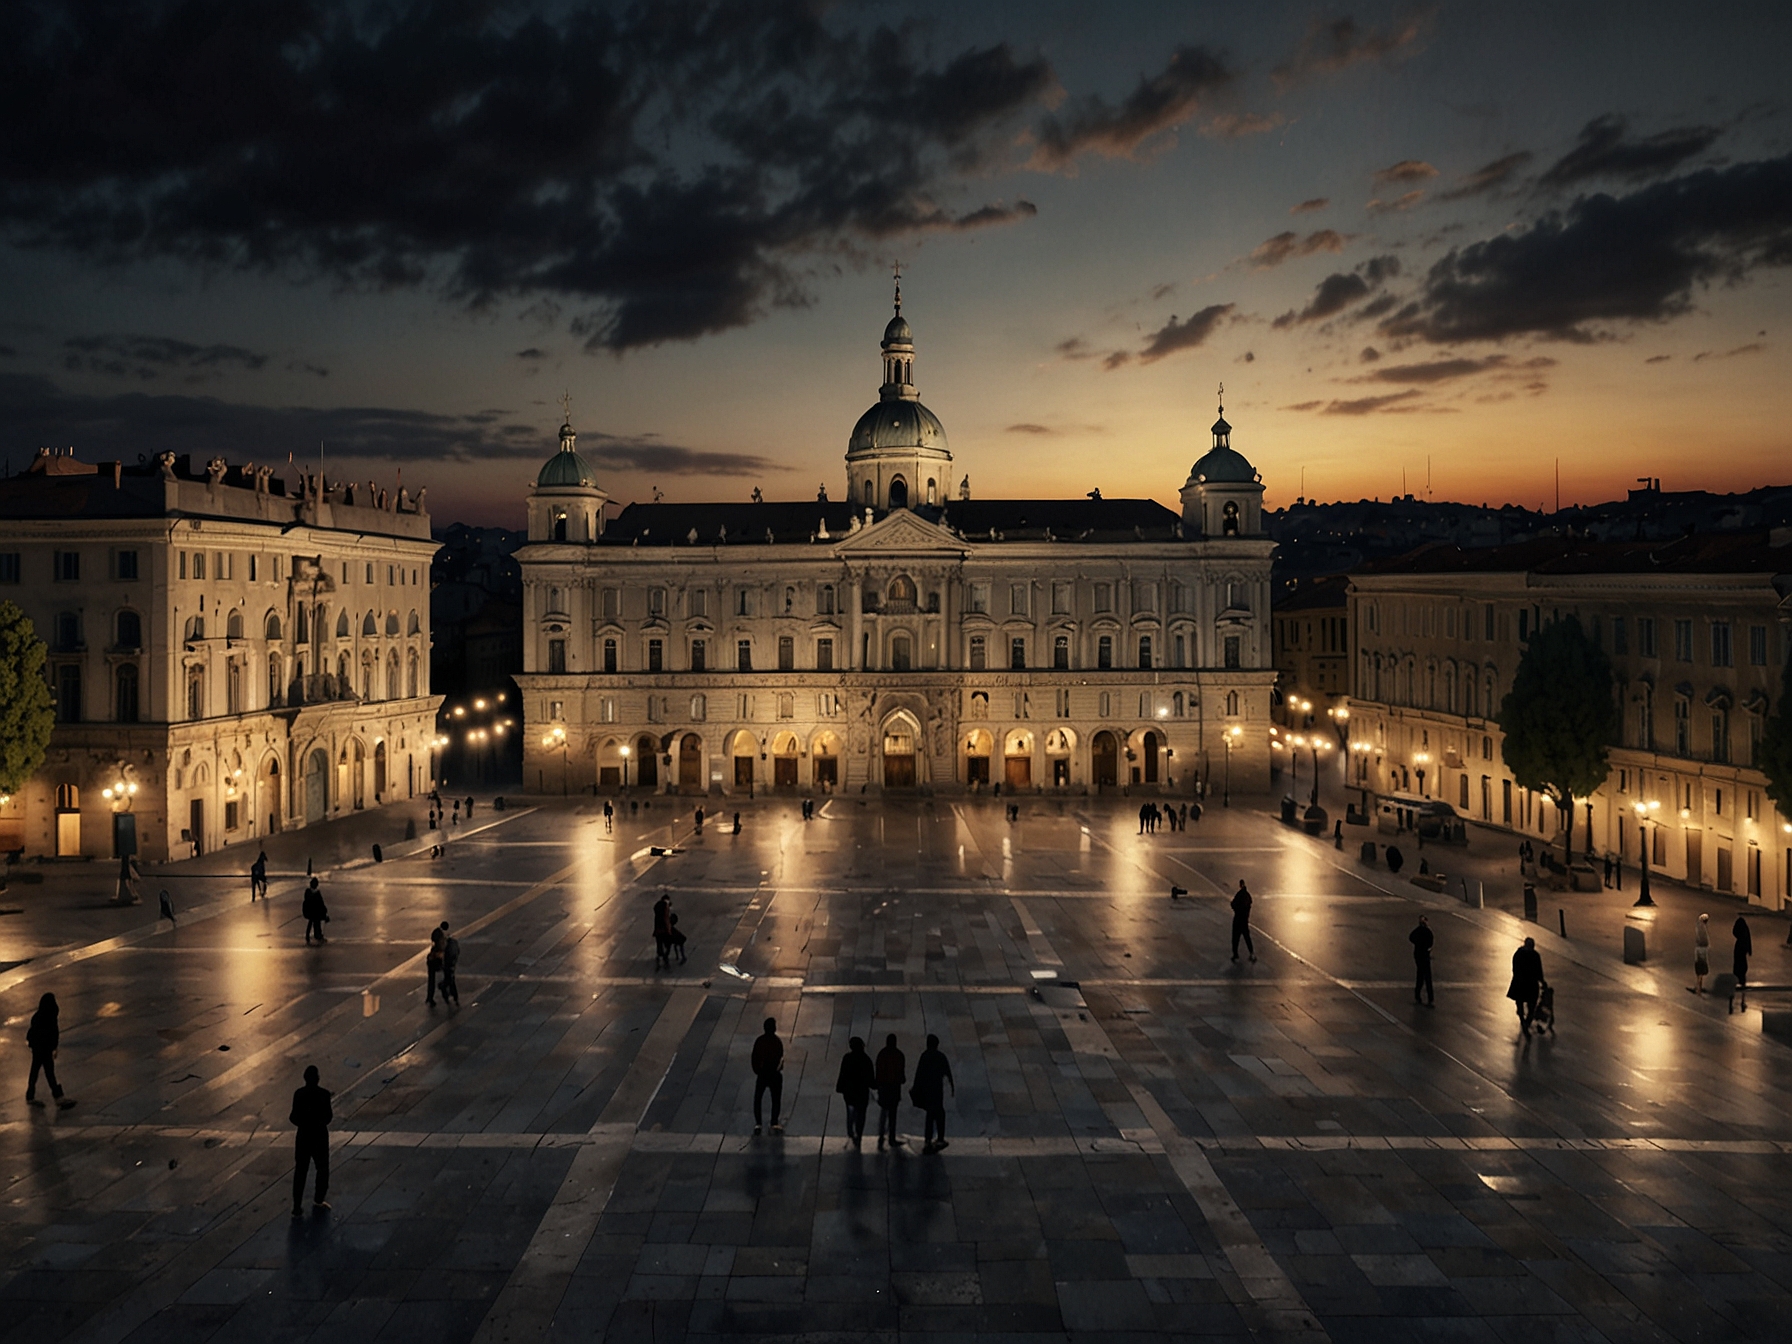 A panoramic view of Piazza Castello at dusk, showcasing the Royal Palace of Turin and Palazzo Madama. The square is alive with tourists and locals, capturing the essence of Turin's regal history.